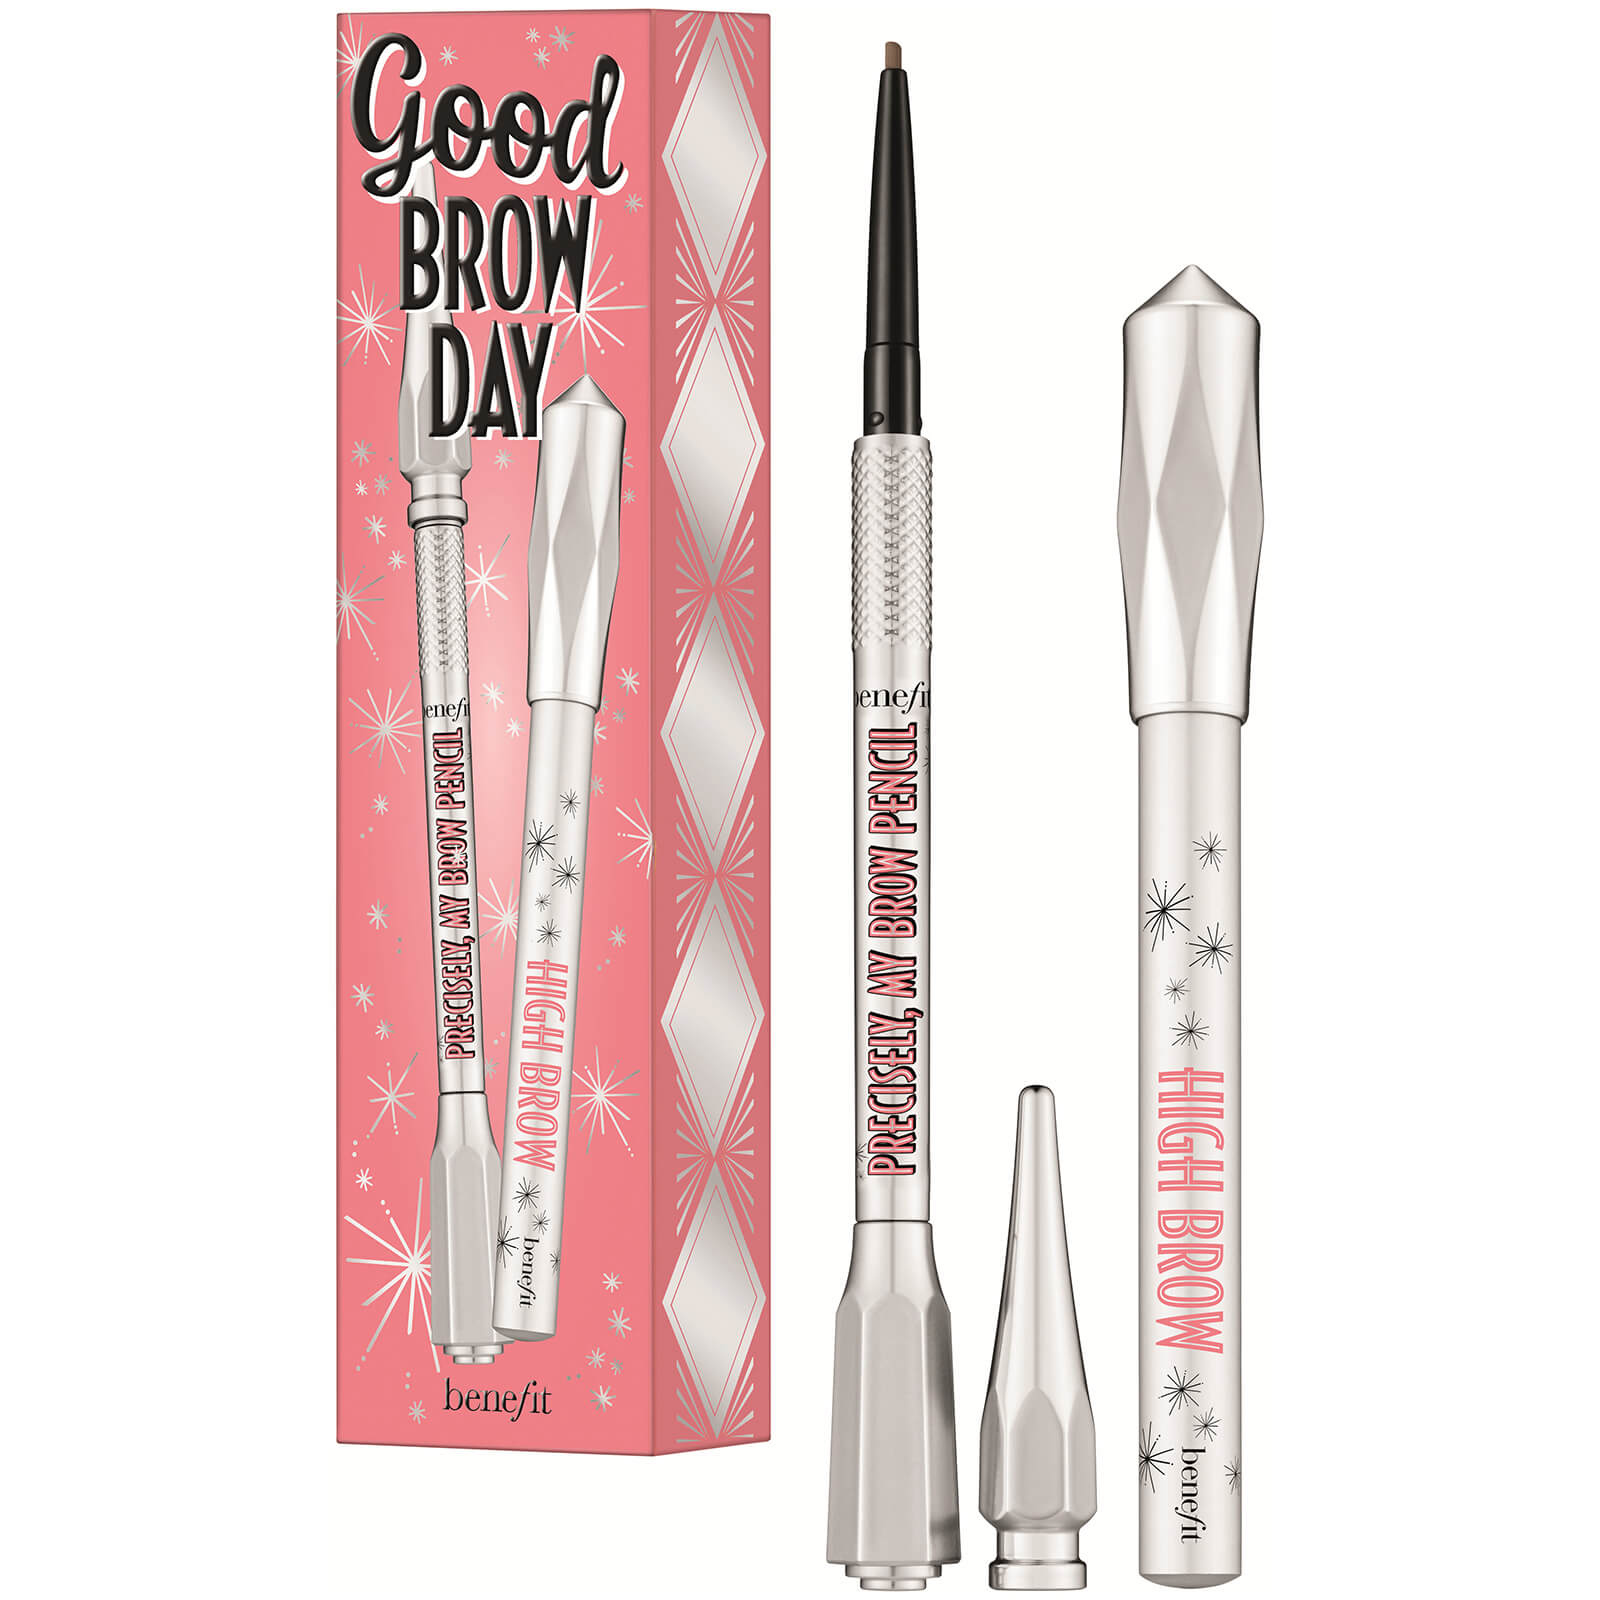 Benefit Good Brow Day Brow Defining and Highlighting Pencil Duo 2.88g (Various Shades) (Worth 41.50) - 03 Warm Light Brown